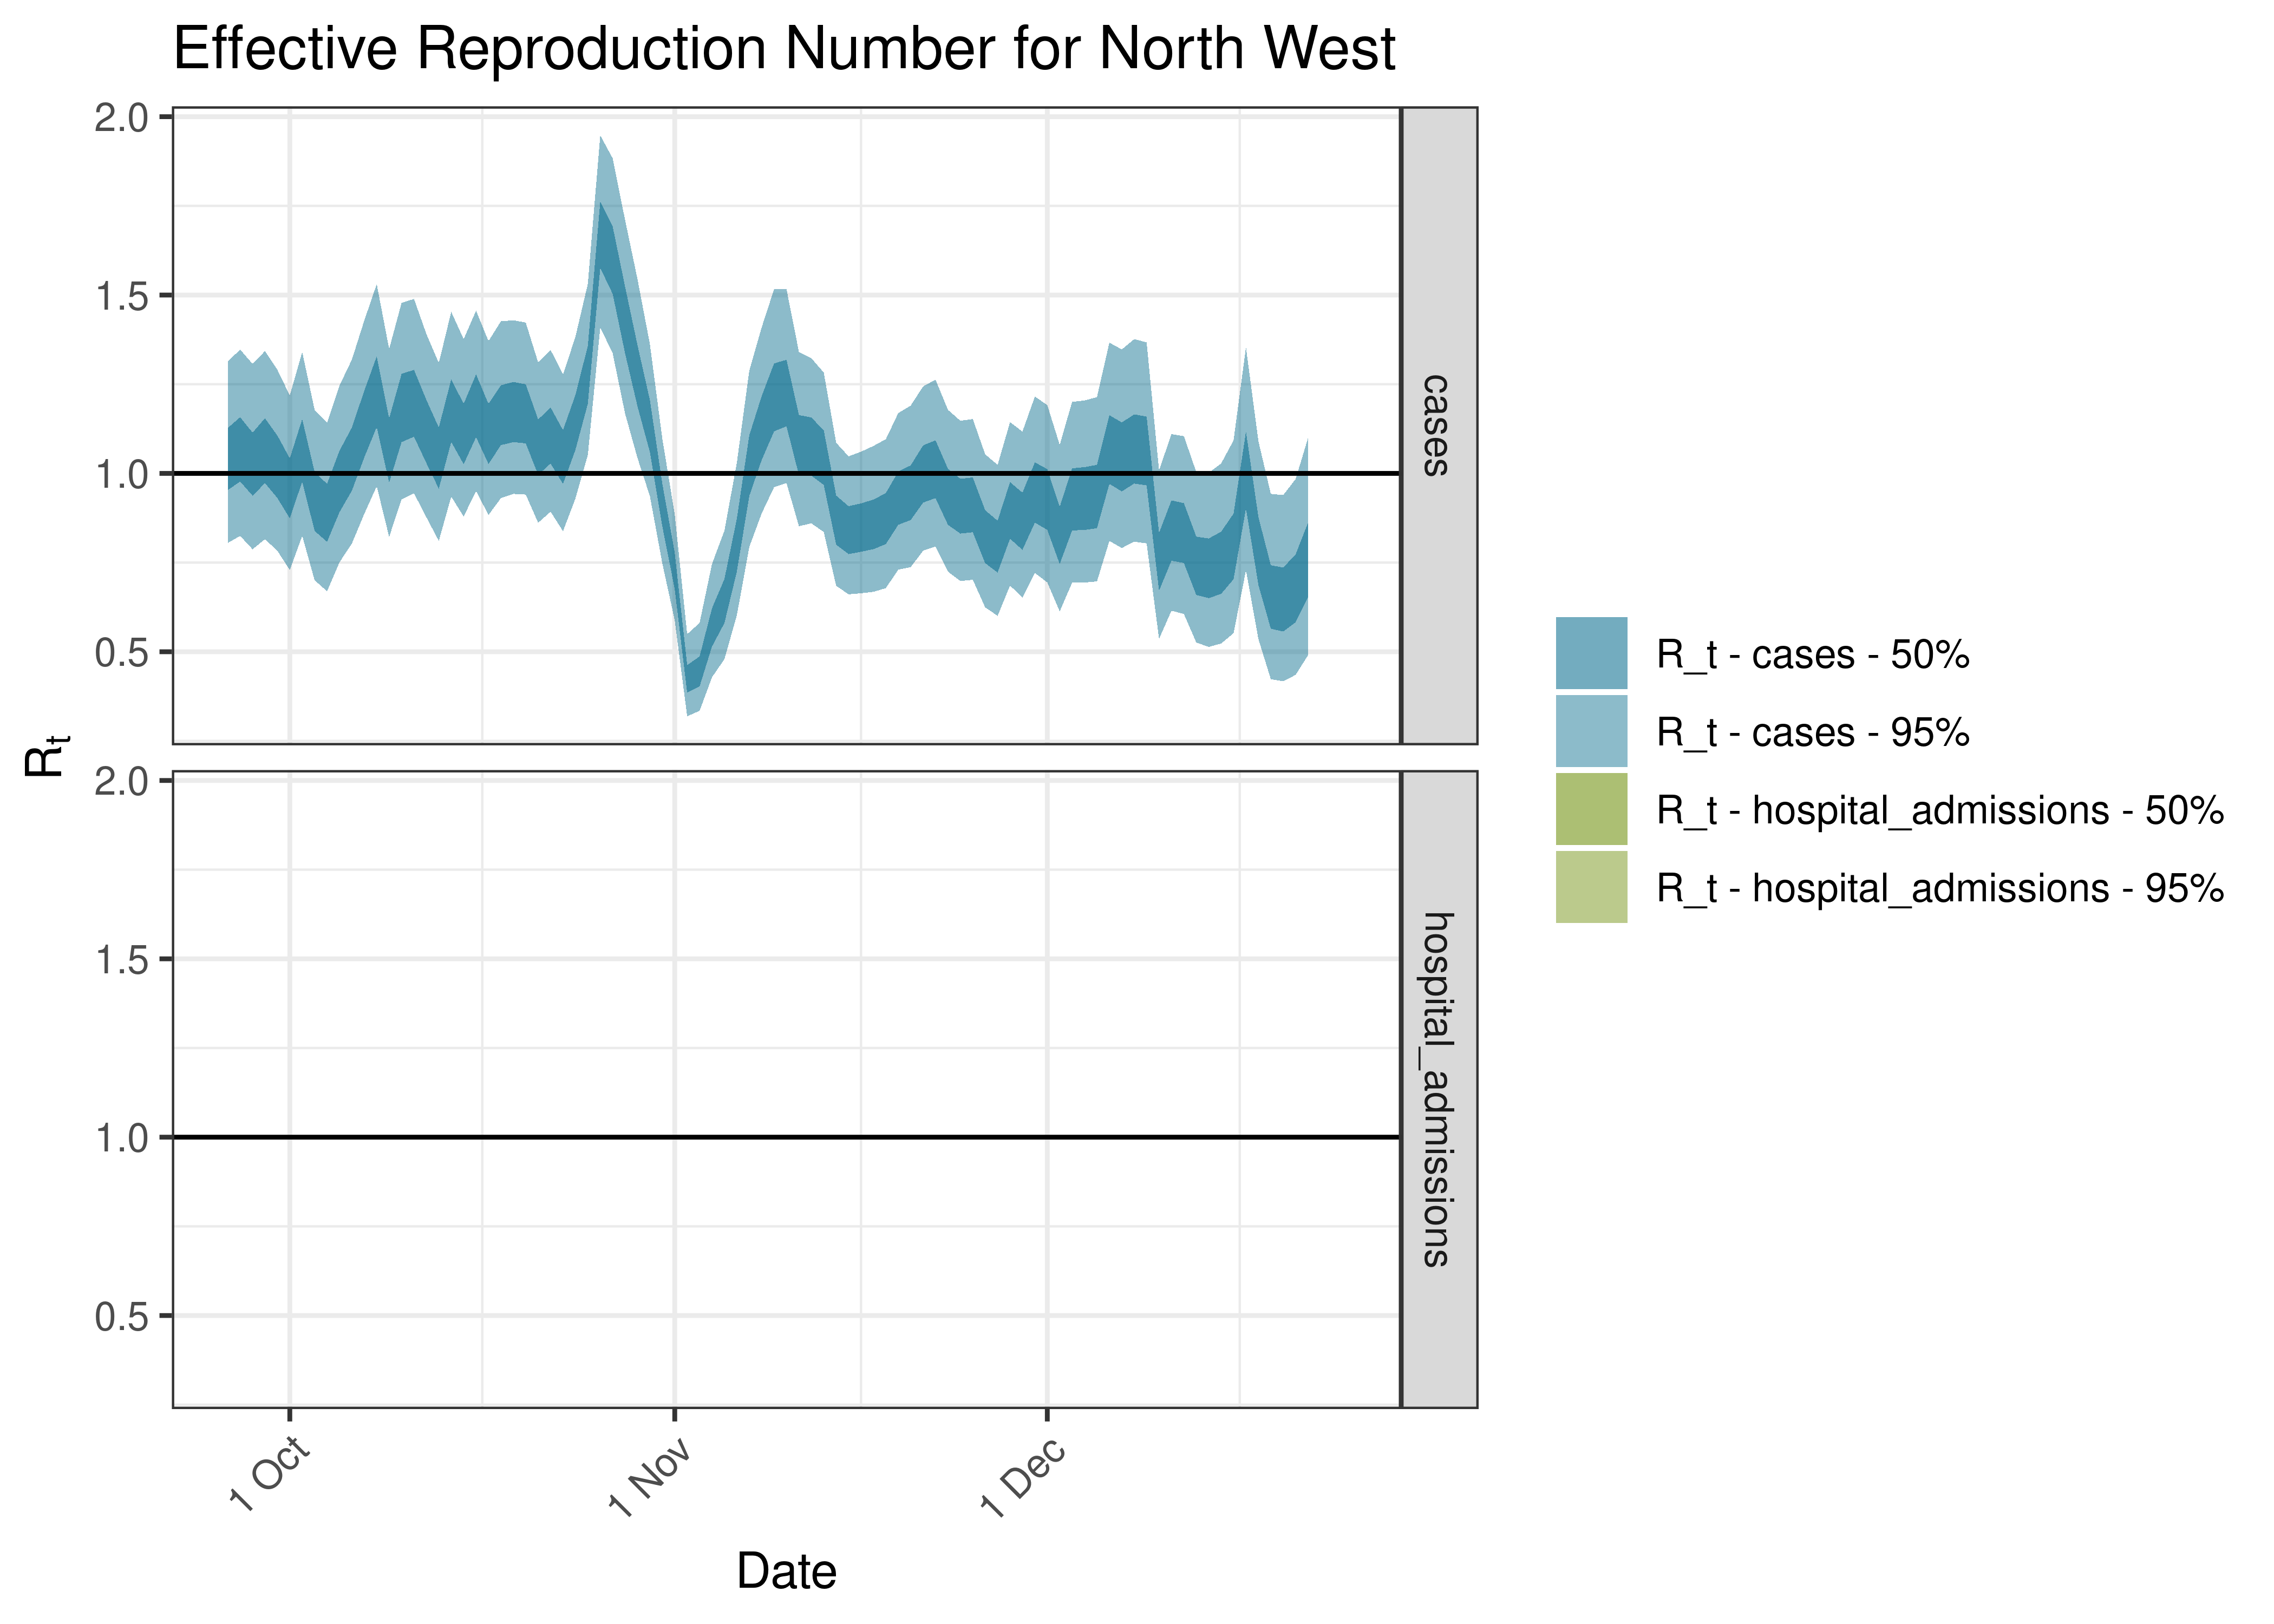 Estimated Effective Reproduction Number for North West over last 90 days